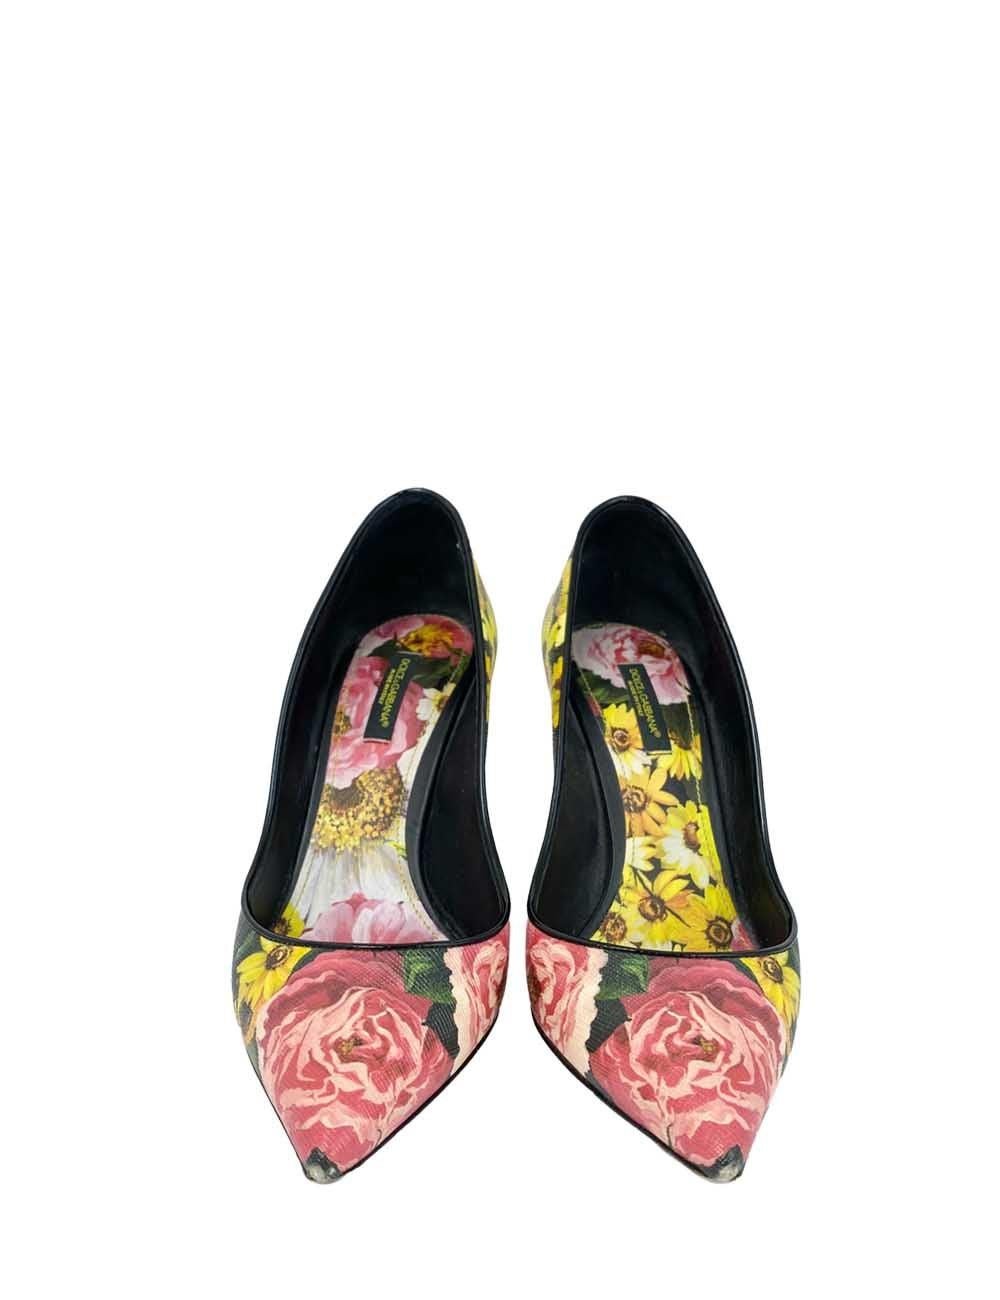 Dolce & Gabbana Multicolored floral pointed-toe pumps with a black trim. 

Additional information:
Material: Leather
Size: EU 37 
Measurements:
Heel Length: 9 cm
Overall Condition: very good
Interior Condition: barely there signs of use
Exterior